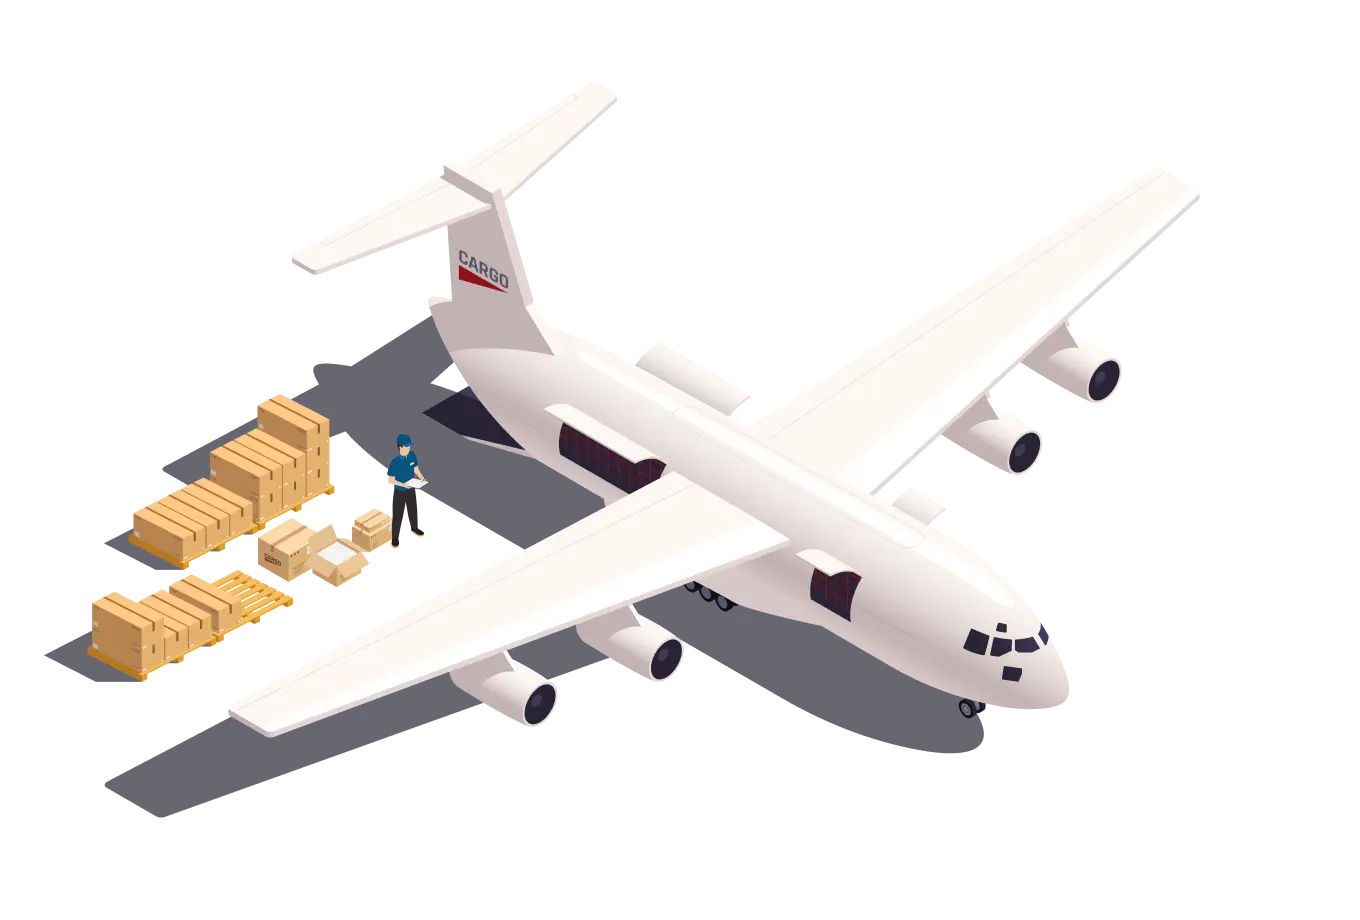 Cargo plane being loaded with boxes on pallets